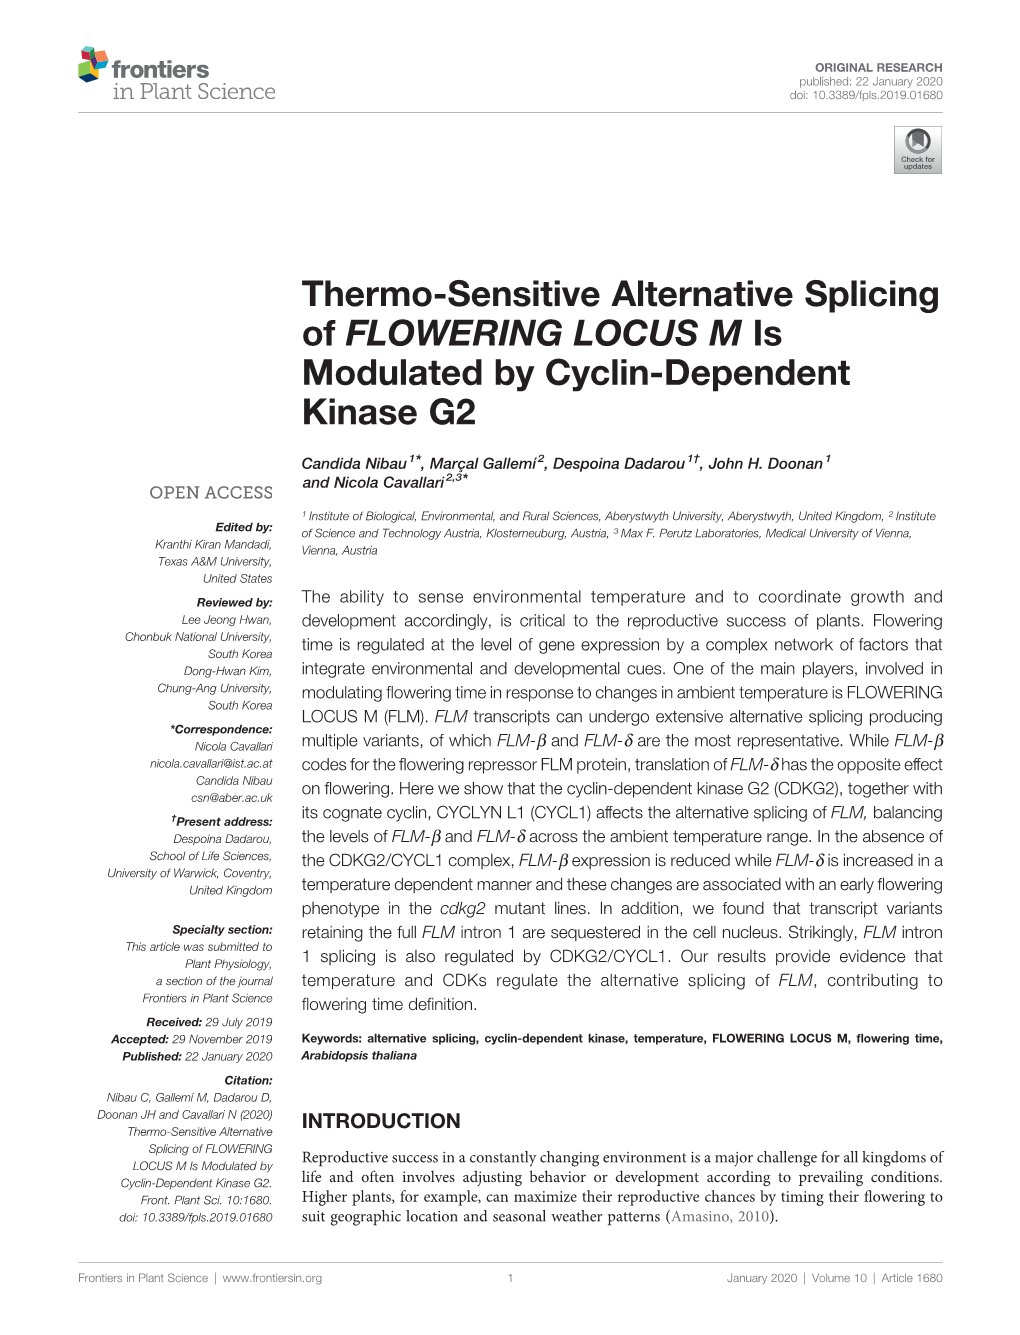 Thermo-Sensitive Alternative Splicing of FLOWERING LOCUS M Is Modulated by Cyclin-Dependent Kinase G2